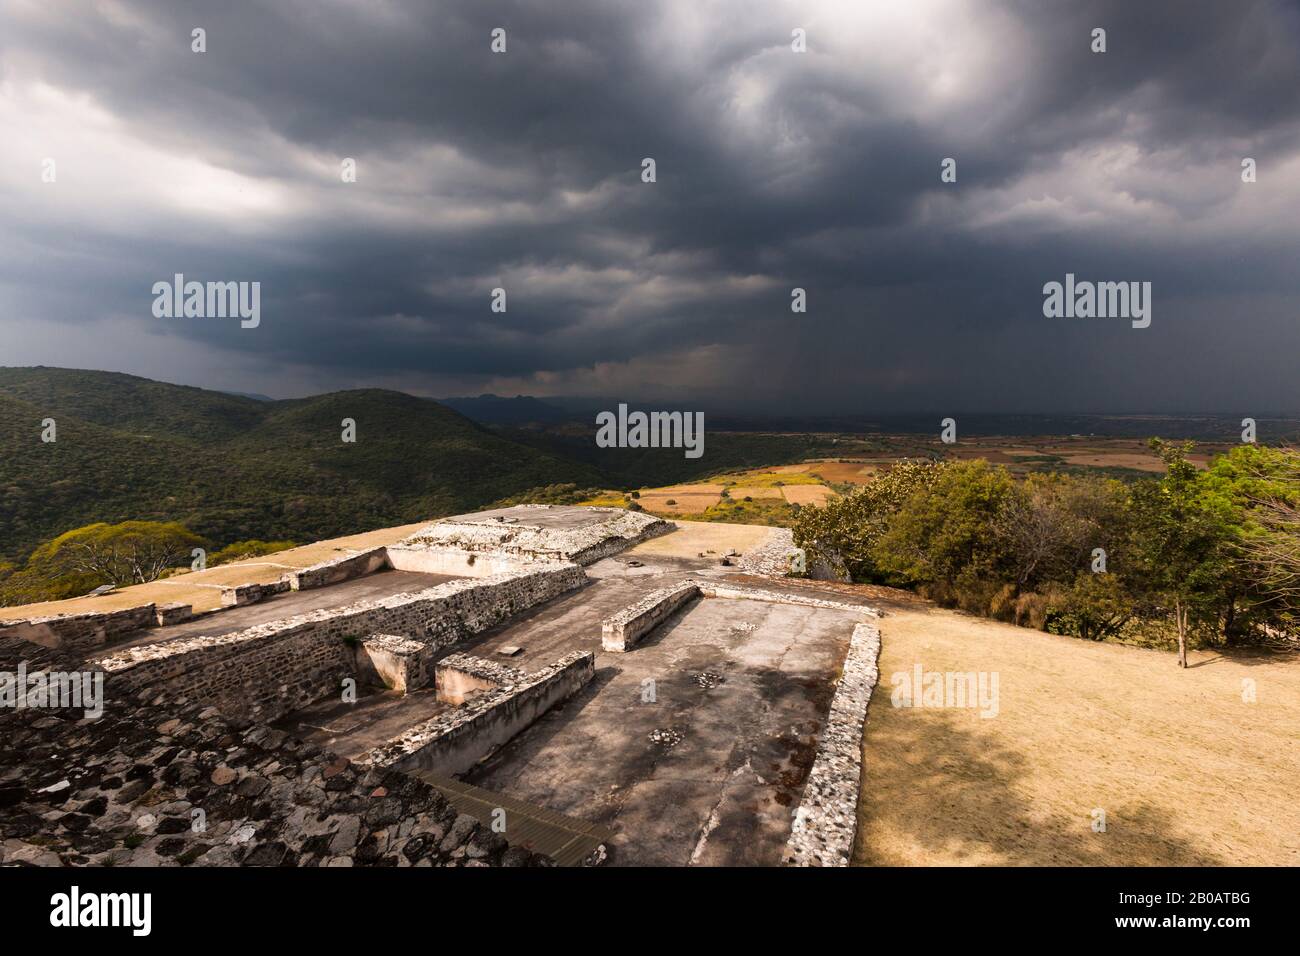 Acropolis under black clouds, Xochicalco archaeological site, Mayan Ruins, Morelos, Mexico, Central America Stock Photo